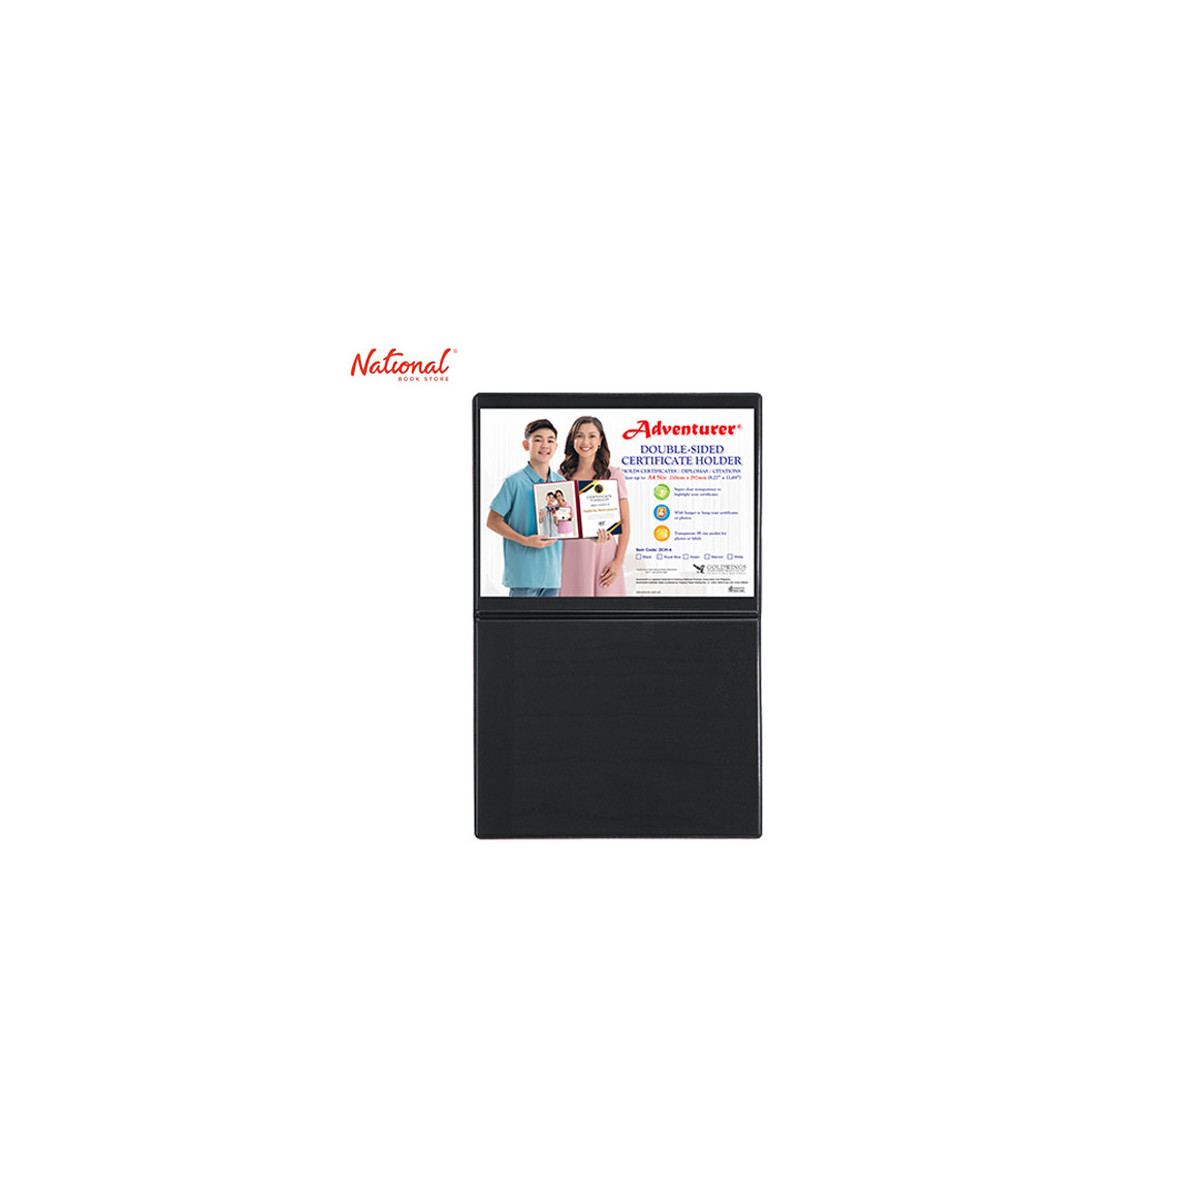 Adventurer Double Sided Certificate Holder 8.27x11.69 inches DCH-4, Black